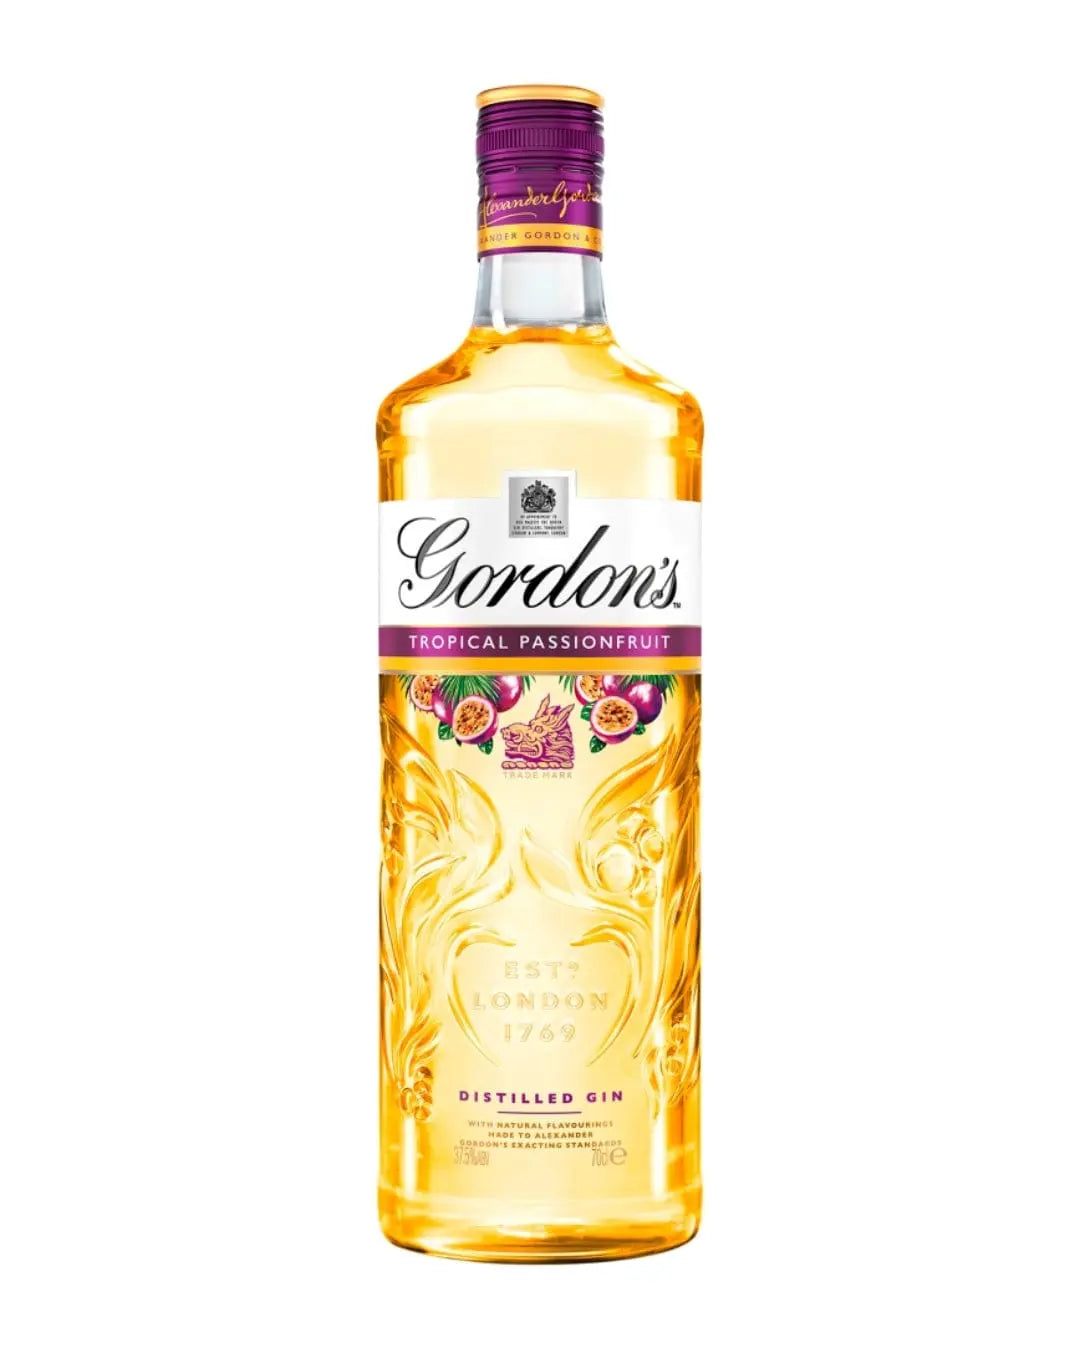 Gordon's Tropical Passionfruit Gin, 70 cl Gin